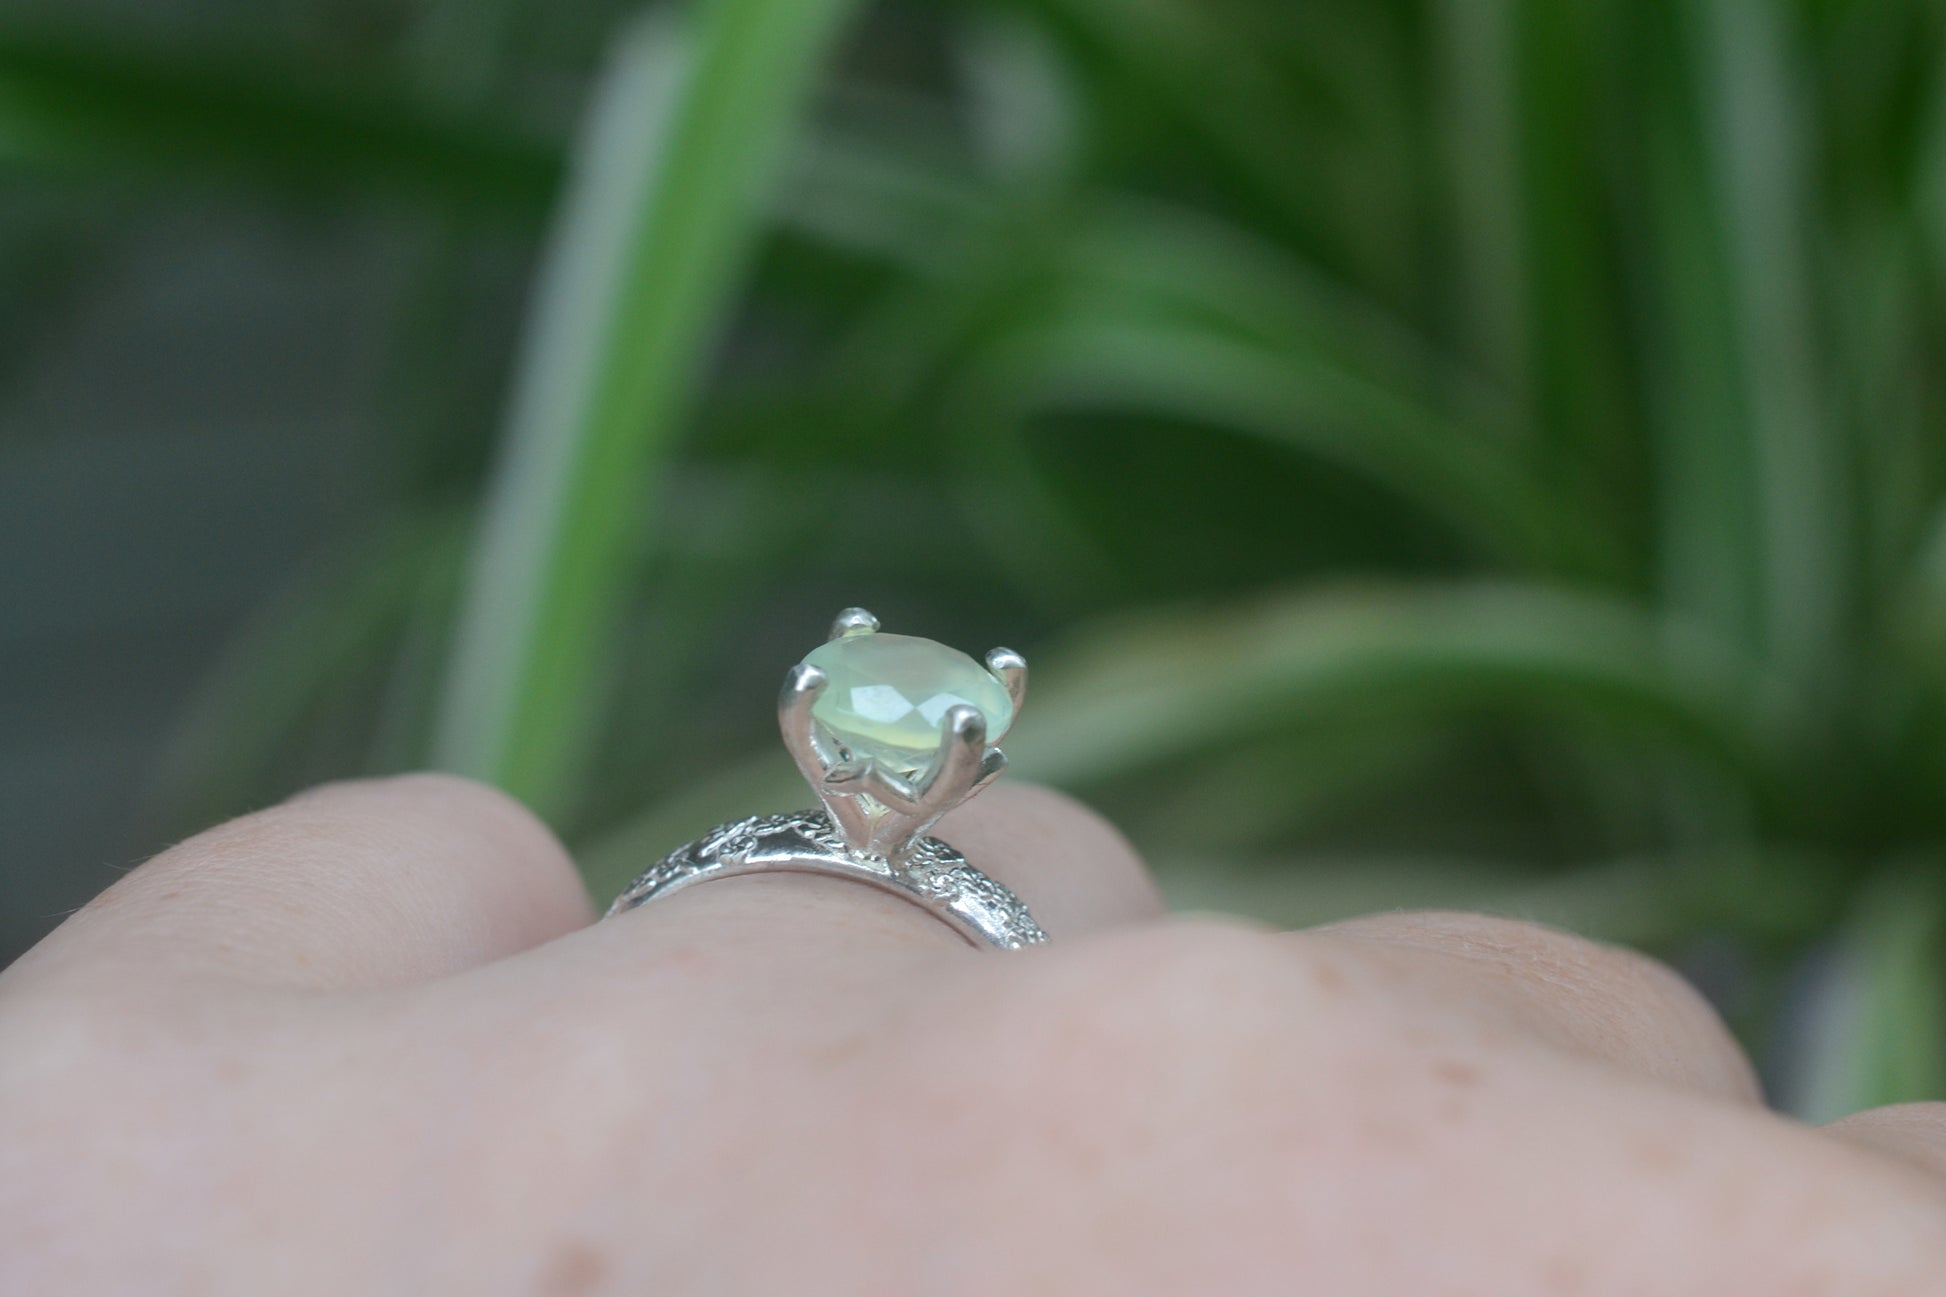 8mm Round Faceted Prehnite Stone Ring in Silver